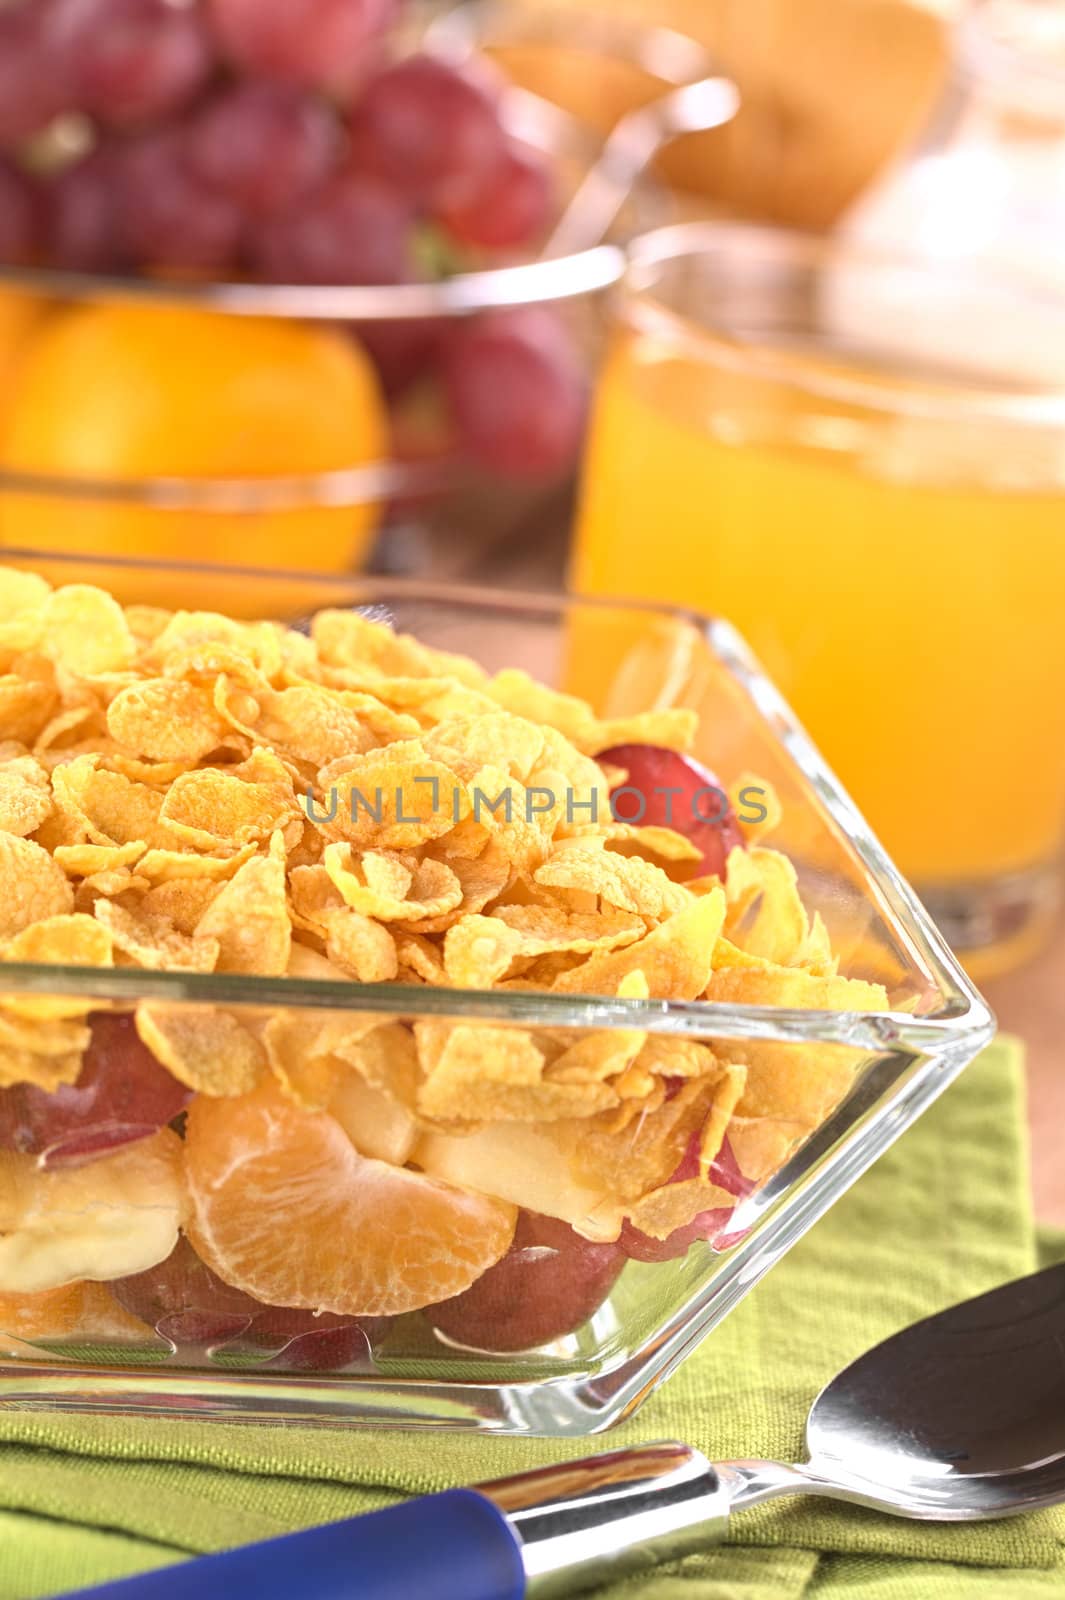 Fresh Fruits with Corn Flakes by ildi